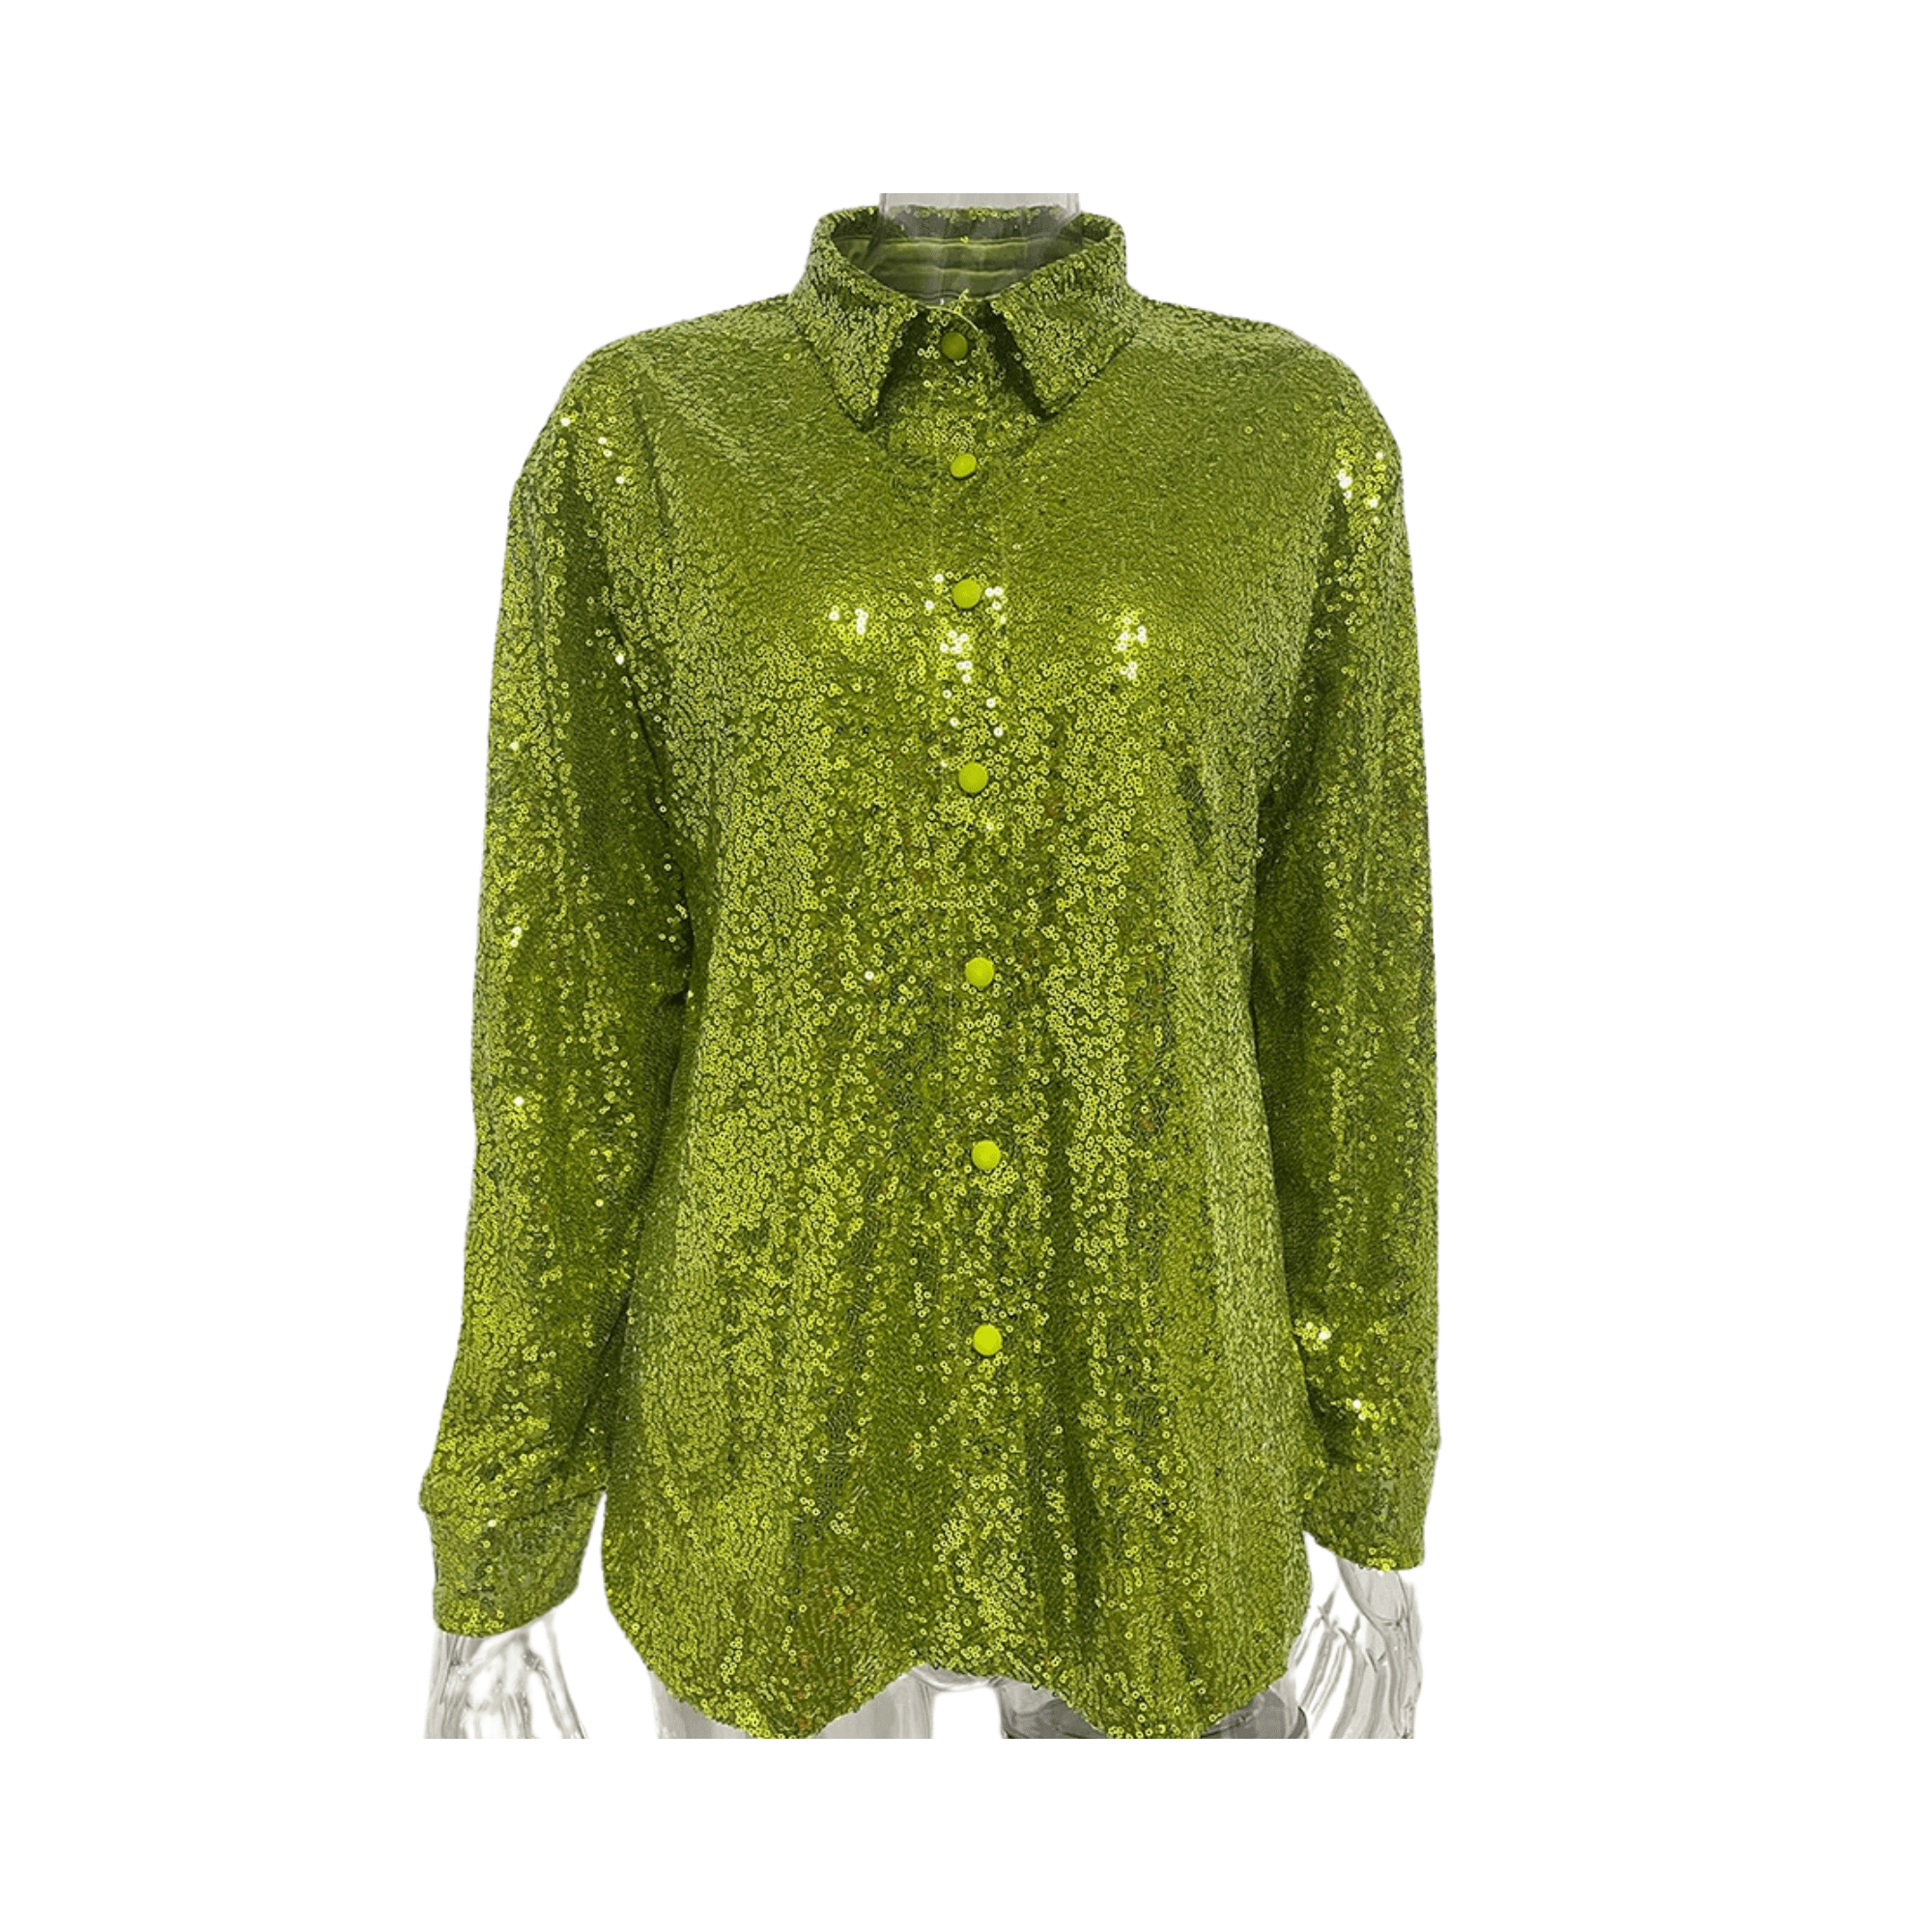 Sequined Sparkly Party Shirt - Kelly Obi New York